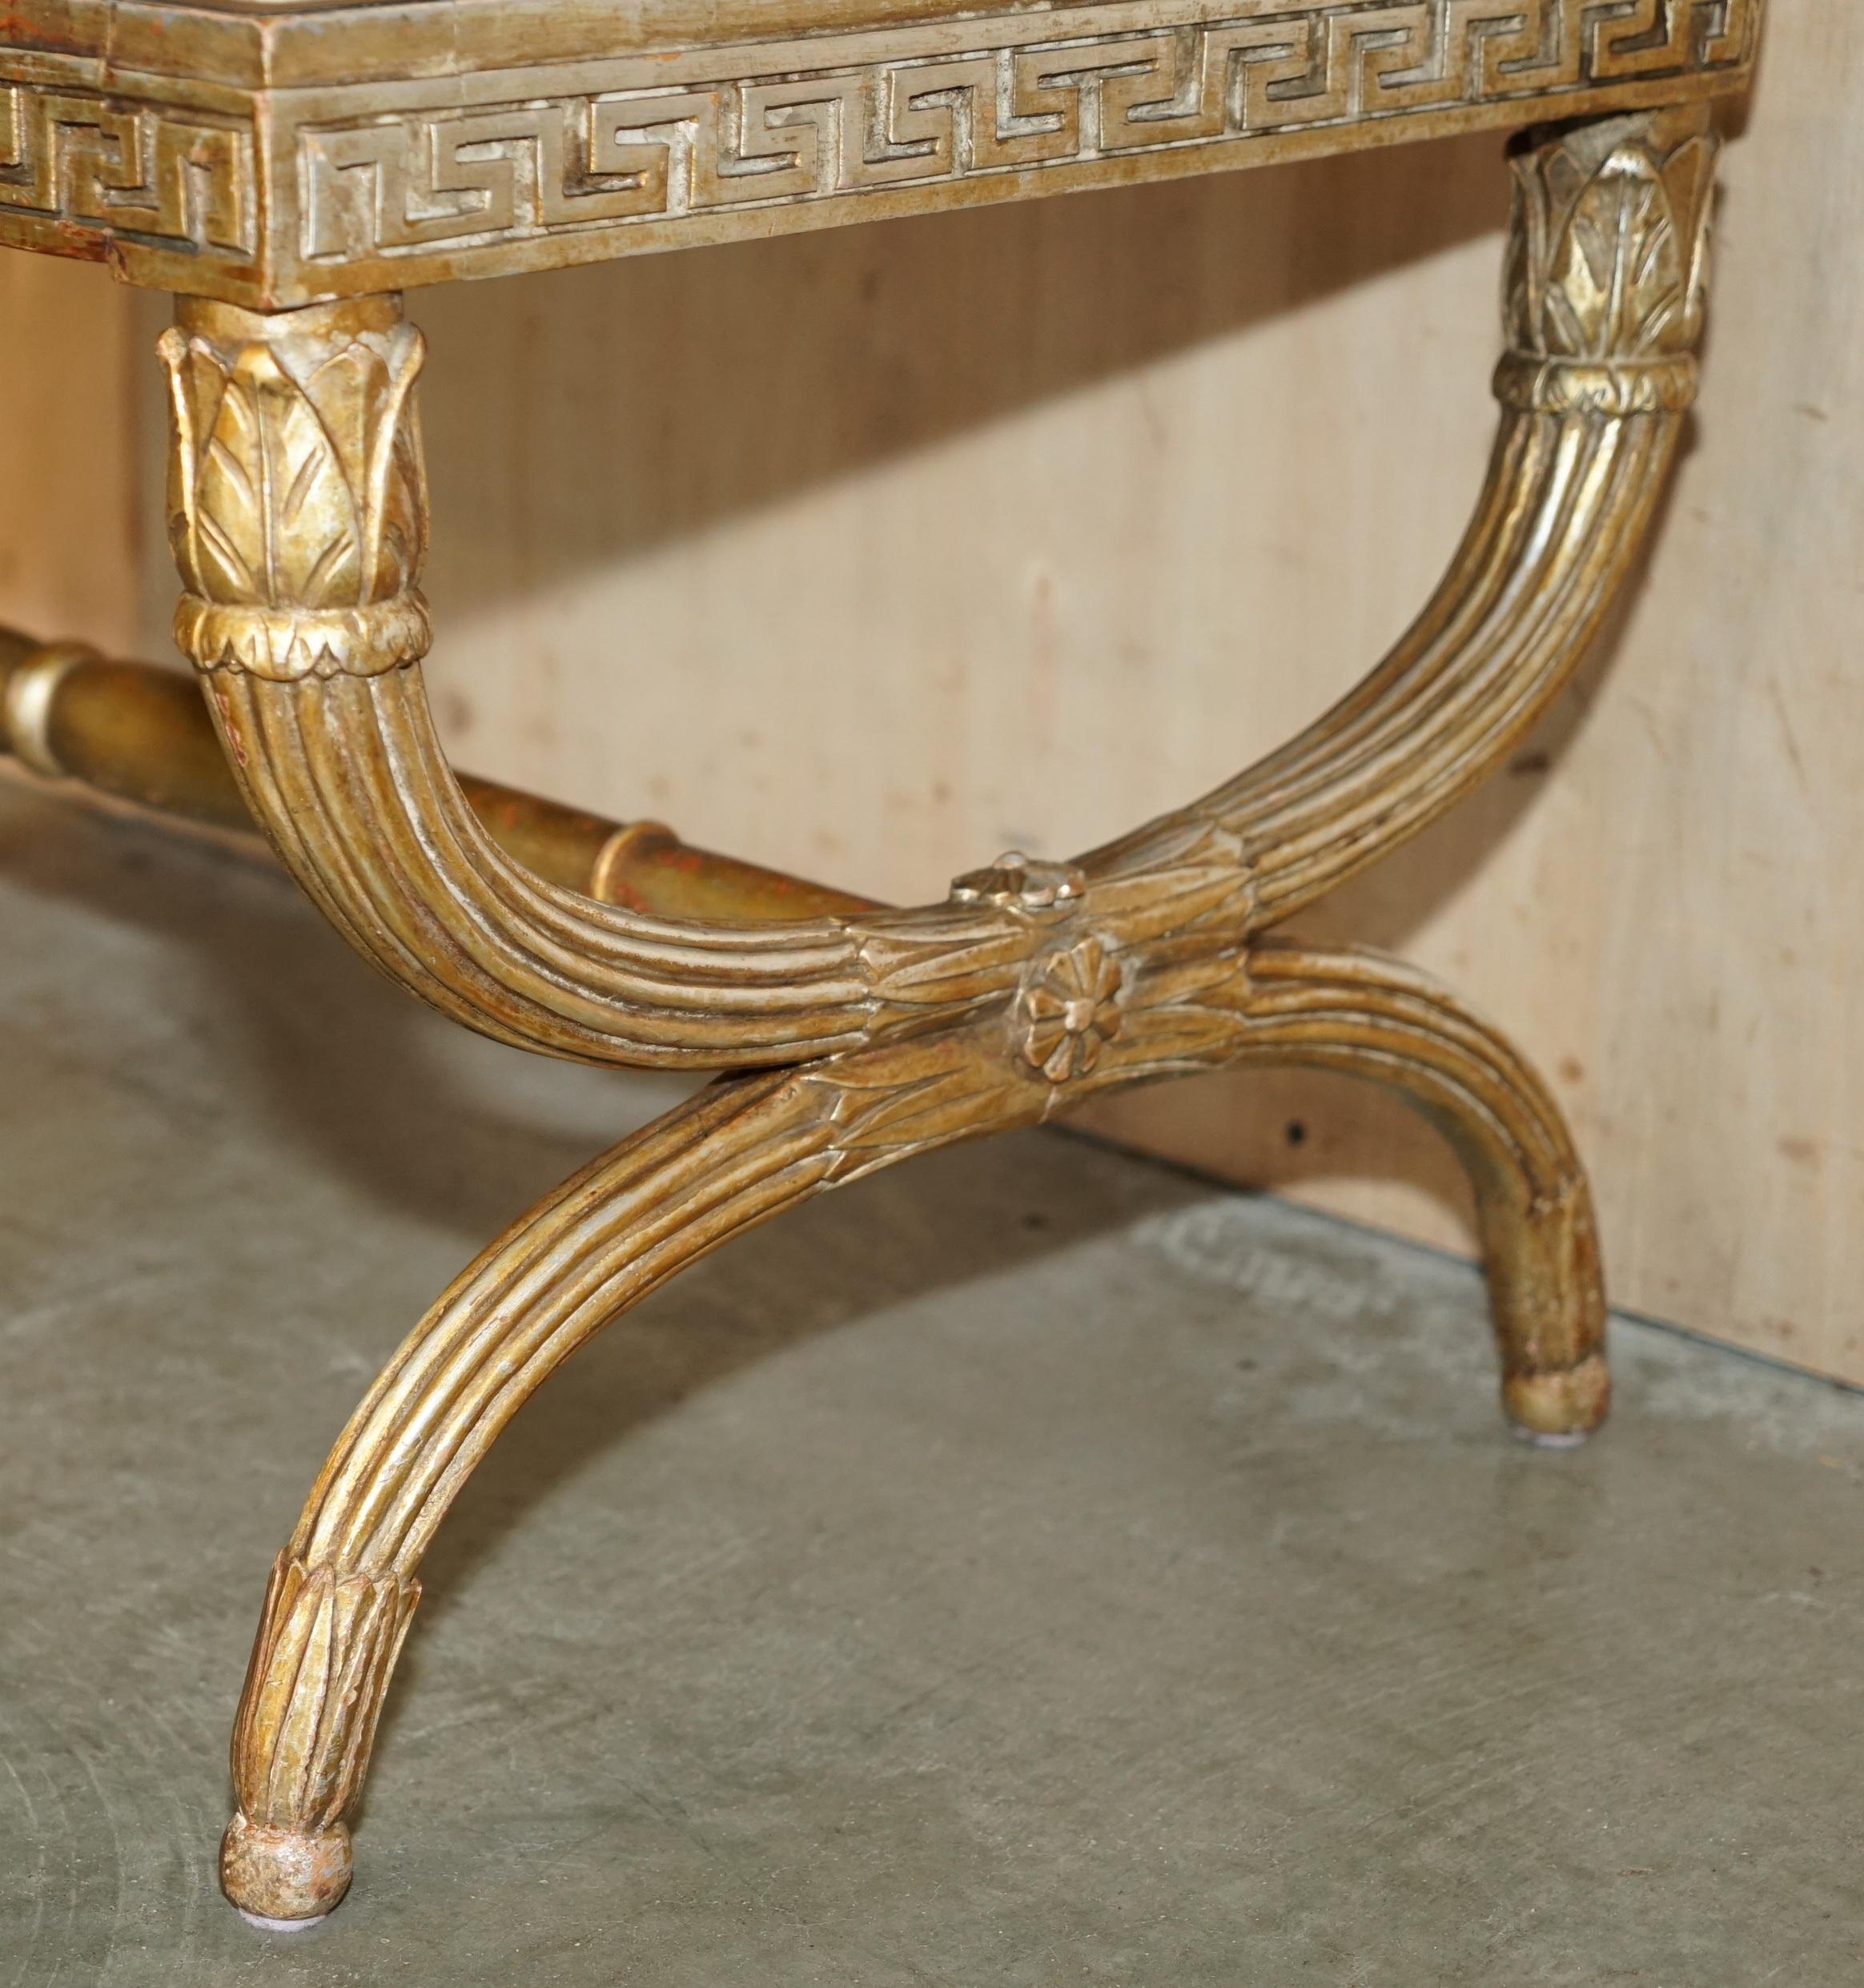 ANTIQUE ITALIAN CiRCA 1860 ORNATELY CARVED & GILTWOOD MARBLE TOPPED COFFEE TABLE For Sale 7